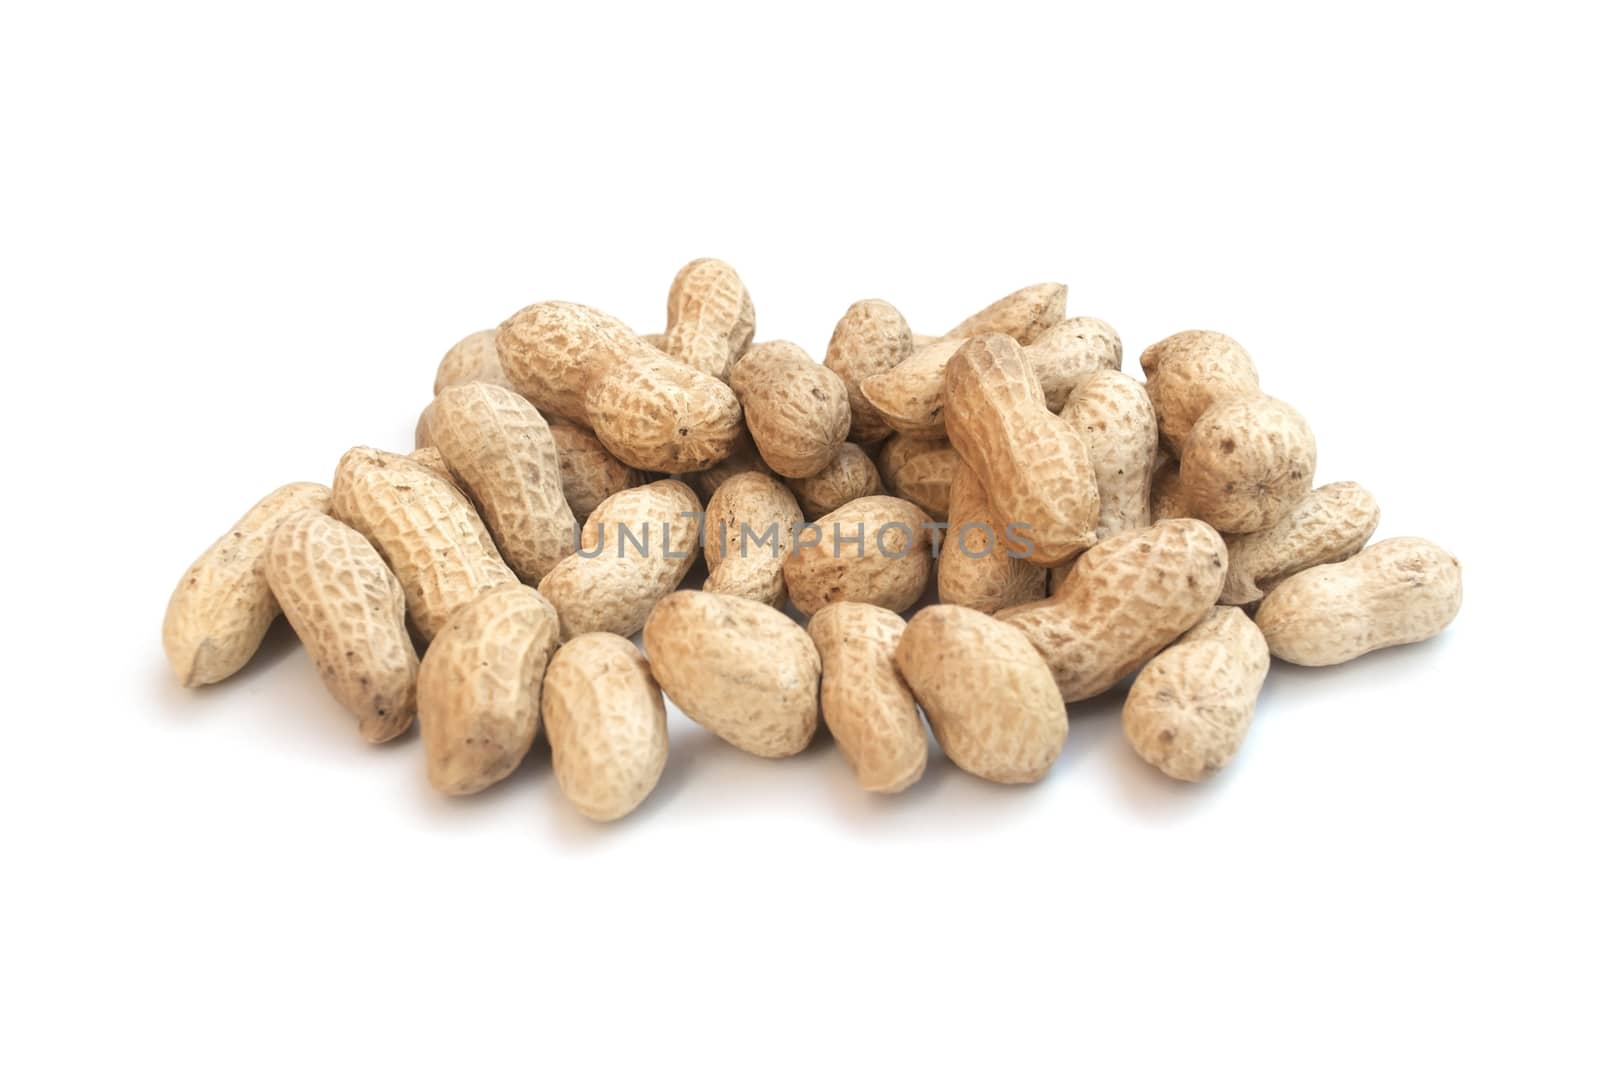 Monkey nuts, peanuts or groundnuts in shells, isolated on a whit by head-off